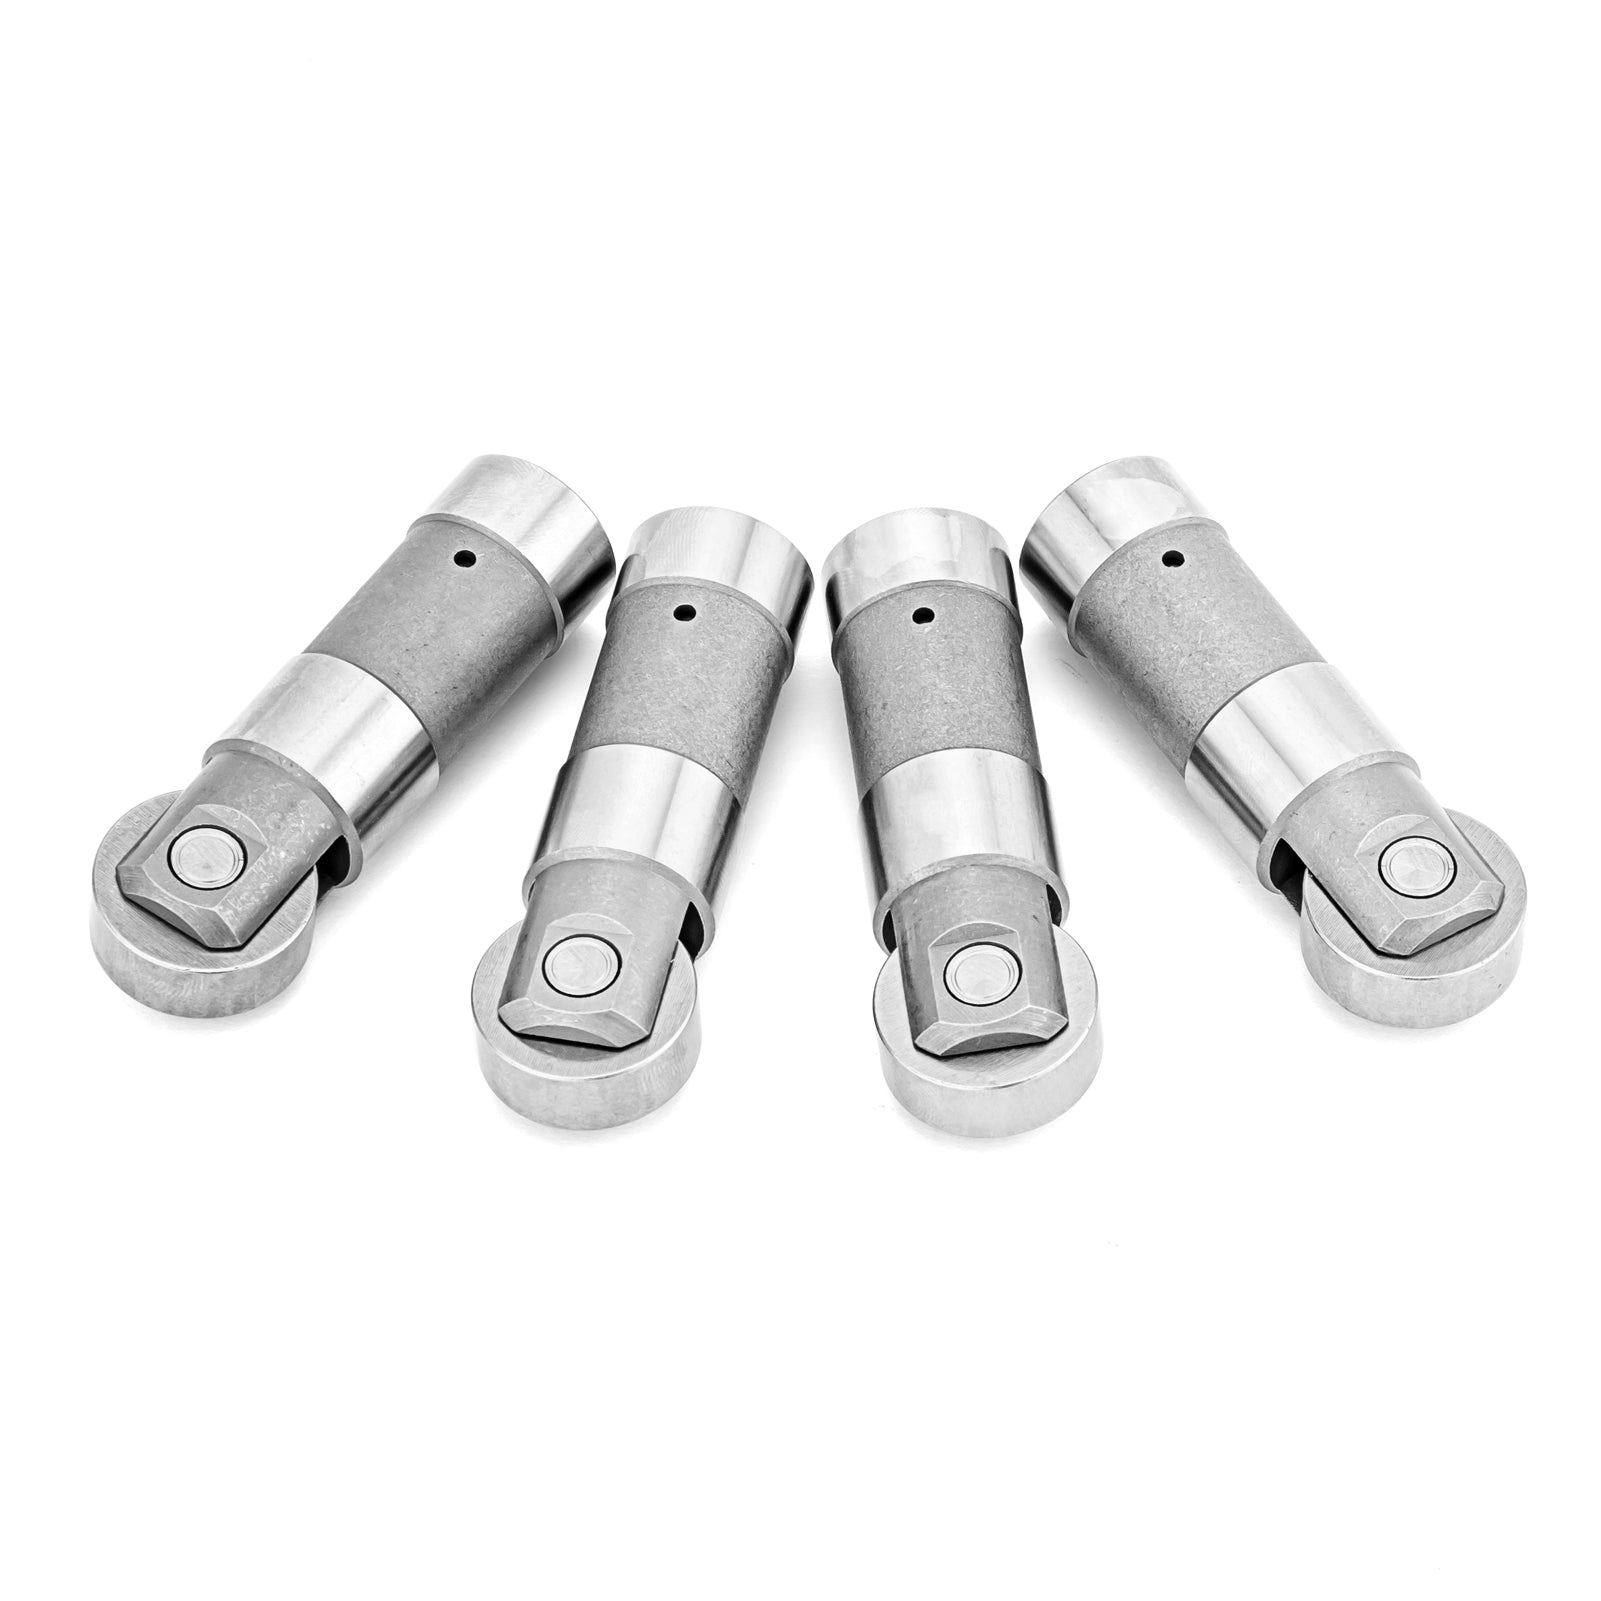 4X Roller Lifter Tappet Hydraulic 20Cr Steel For Harley EVO 1340cc Engine 84-99